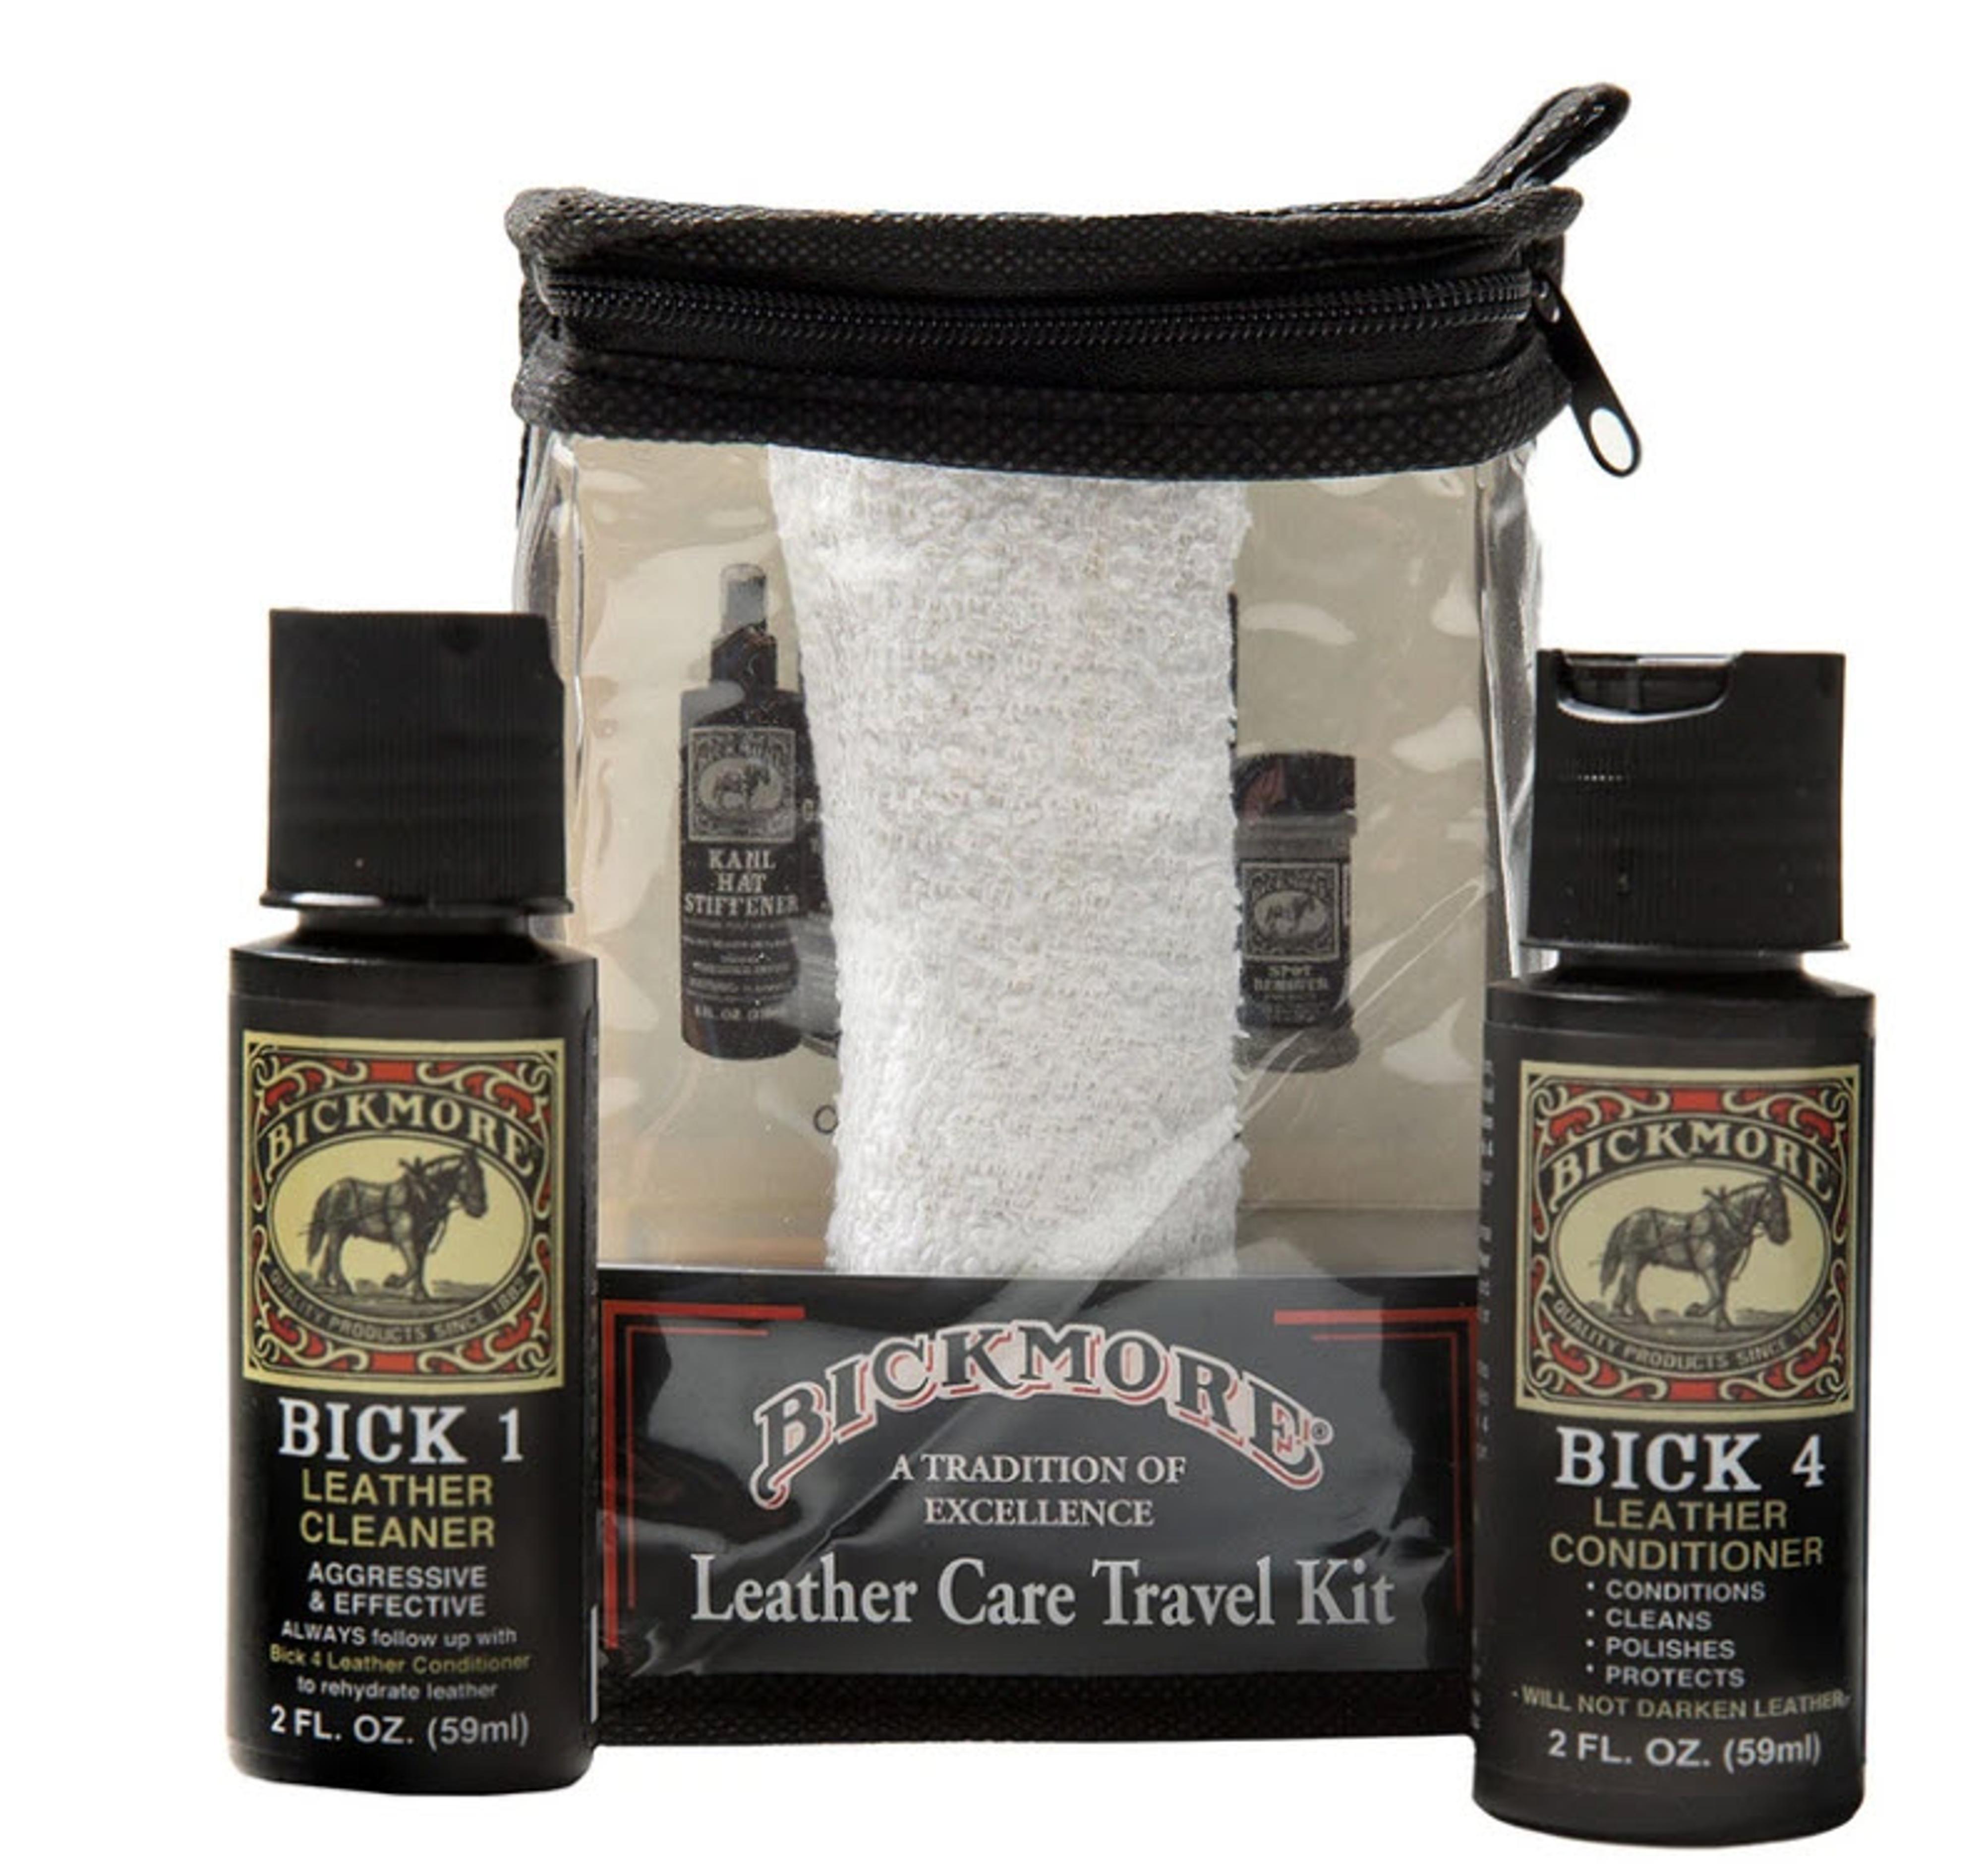 Weaver Bickmore Leather Care 4-Piece Travel Kit